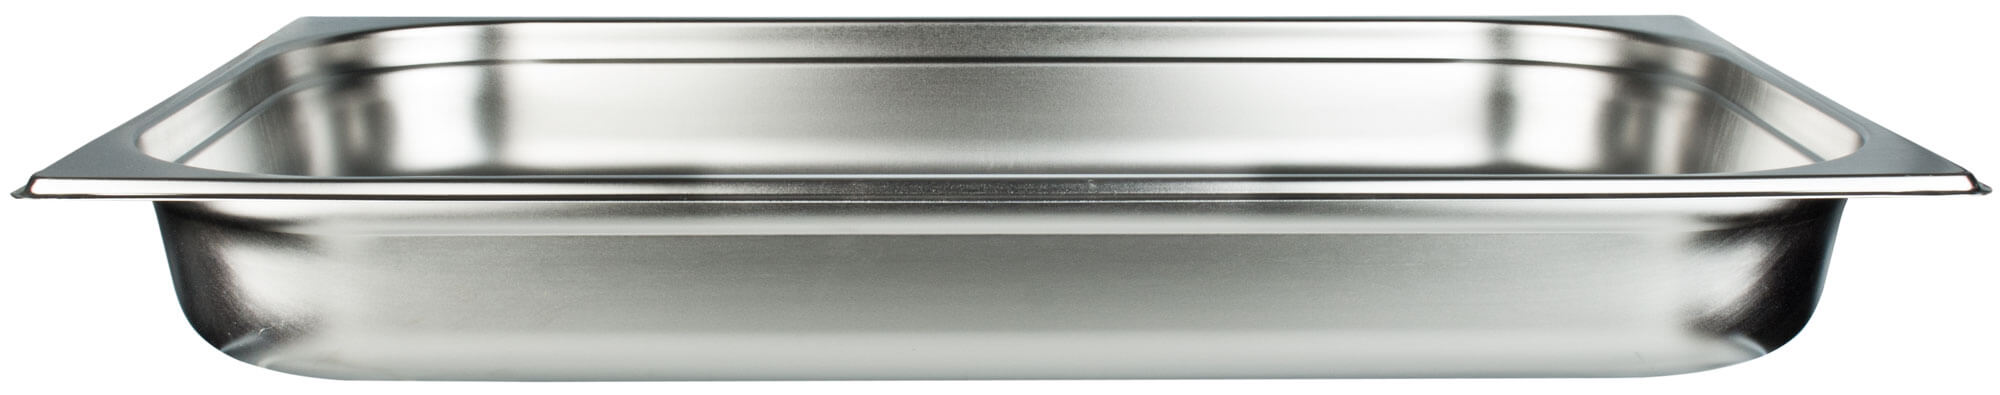 Gastronomy-standard container 65mm depth - stainless steel (GN 1/1)